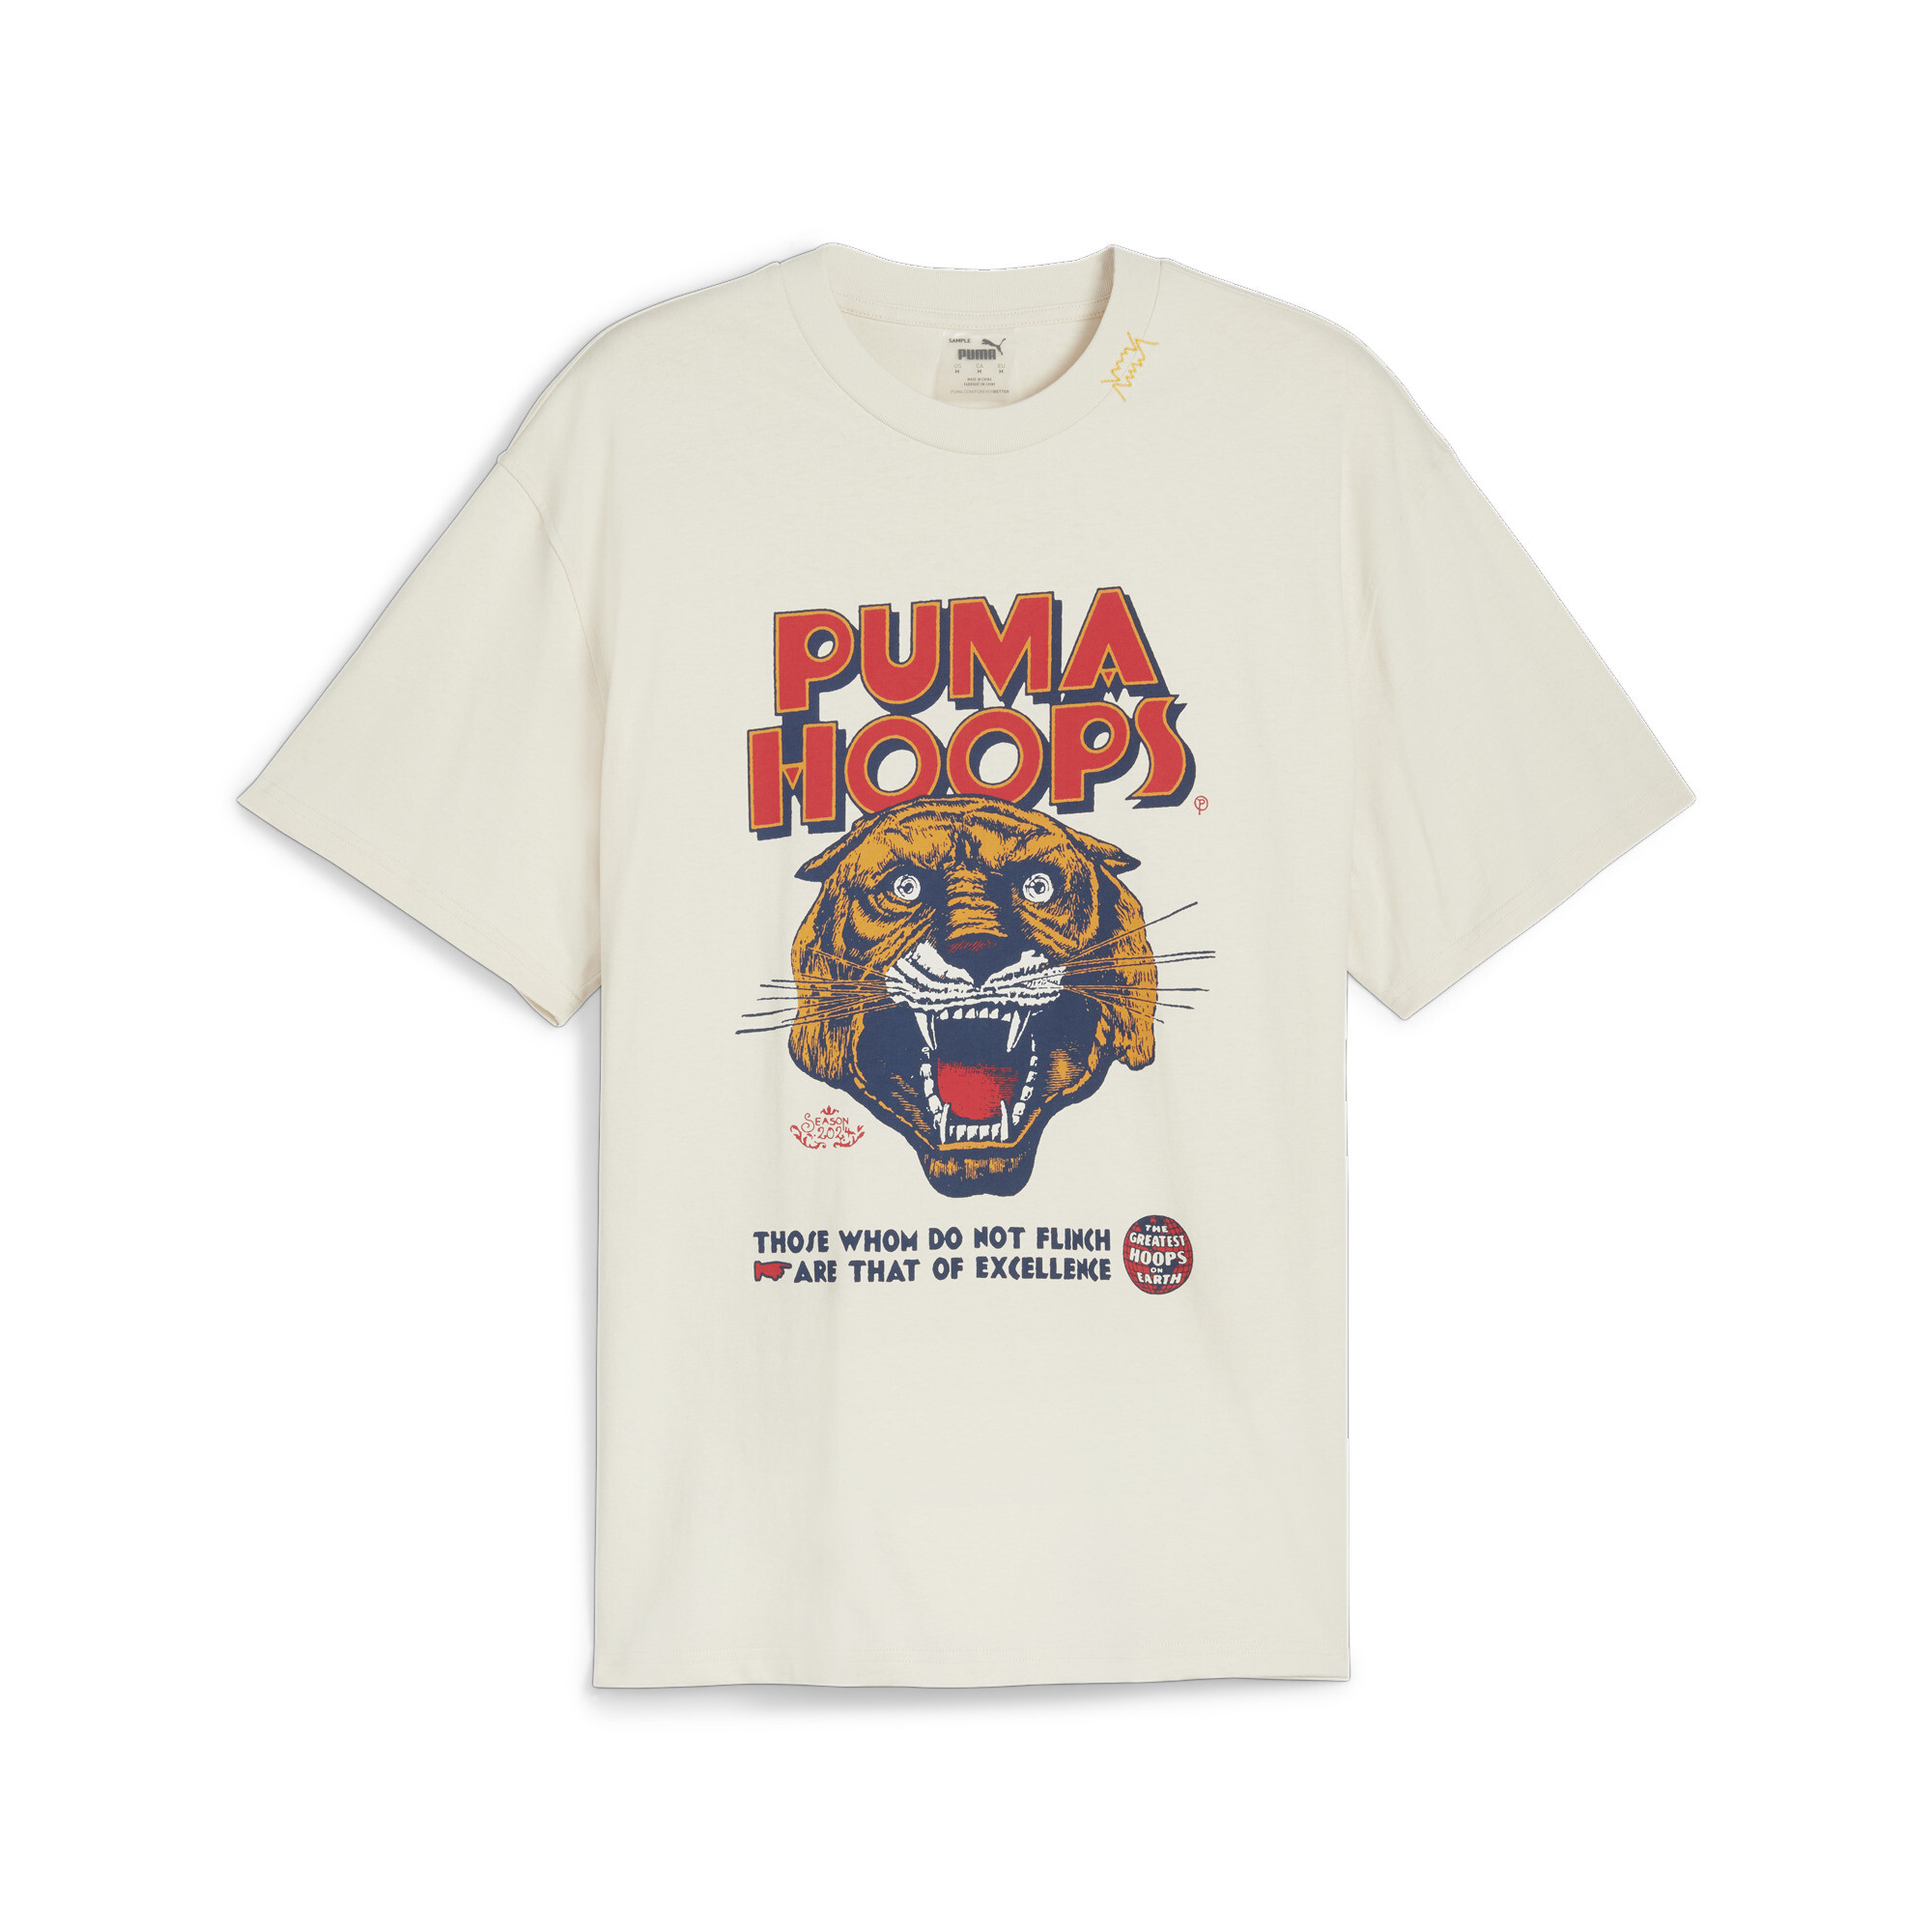 Men's PUMA HOOPS Showtime T-Shirt In White, Size Small